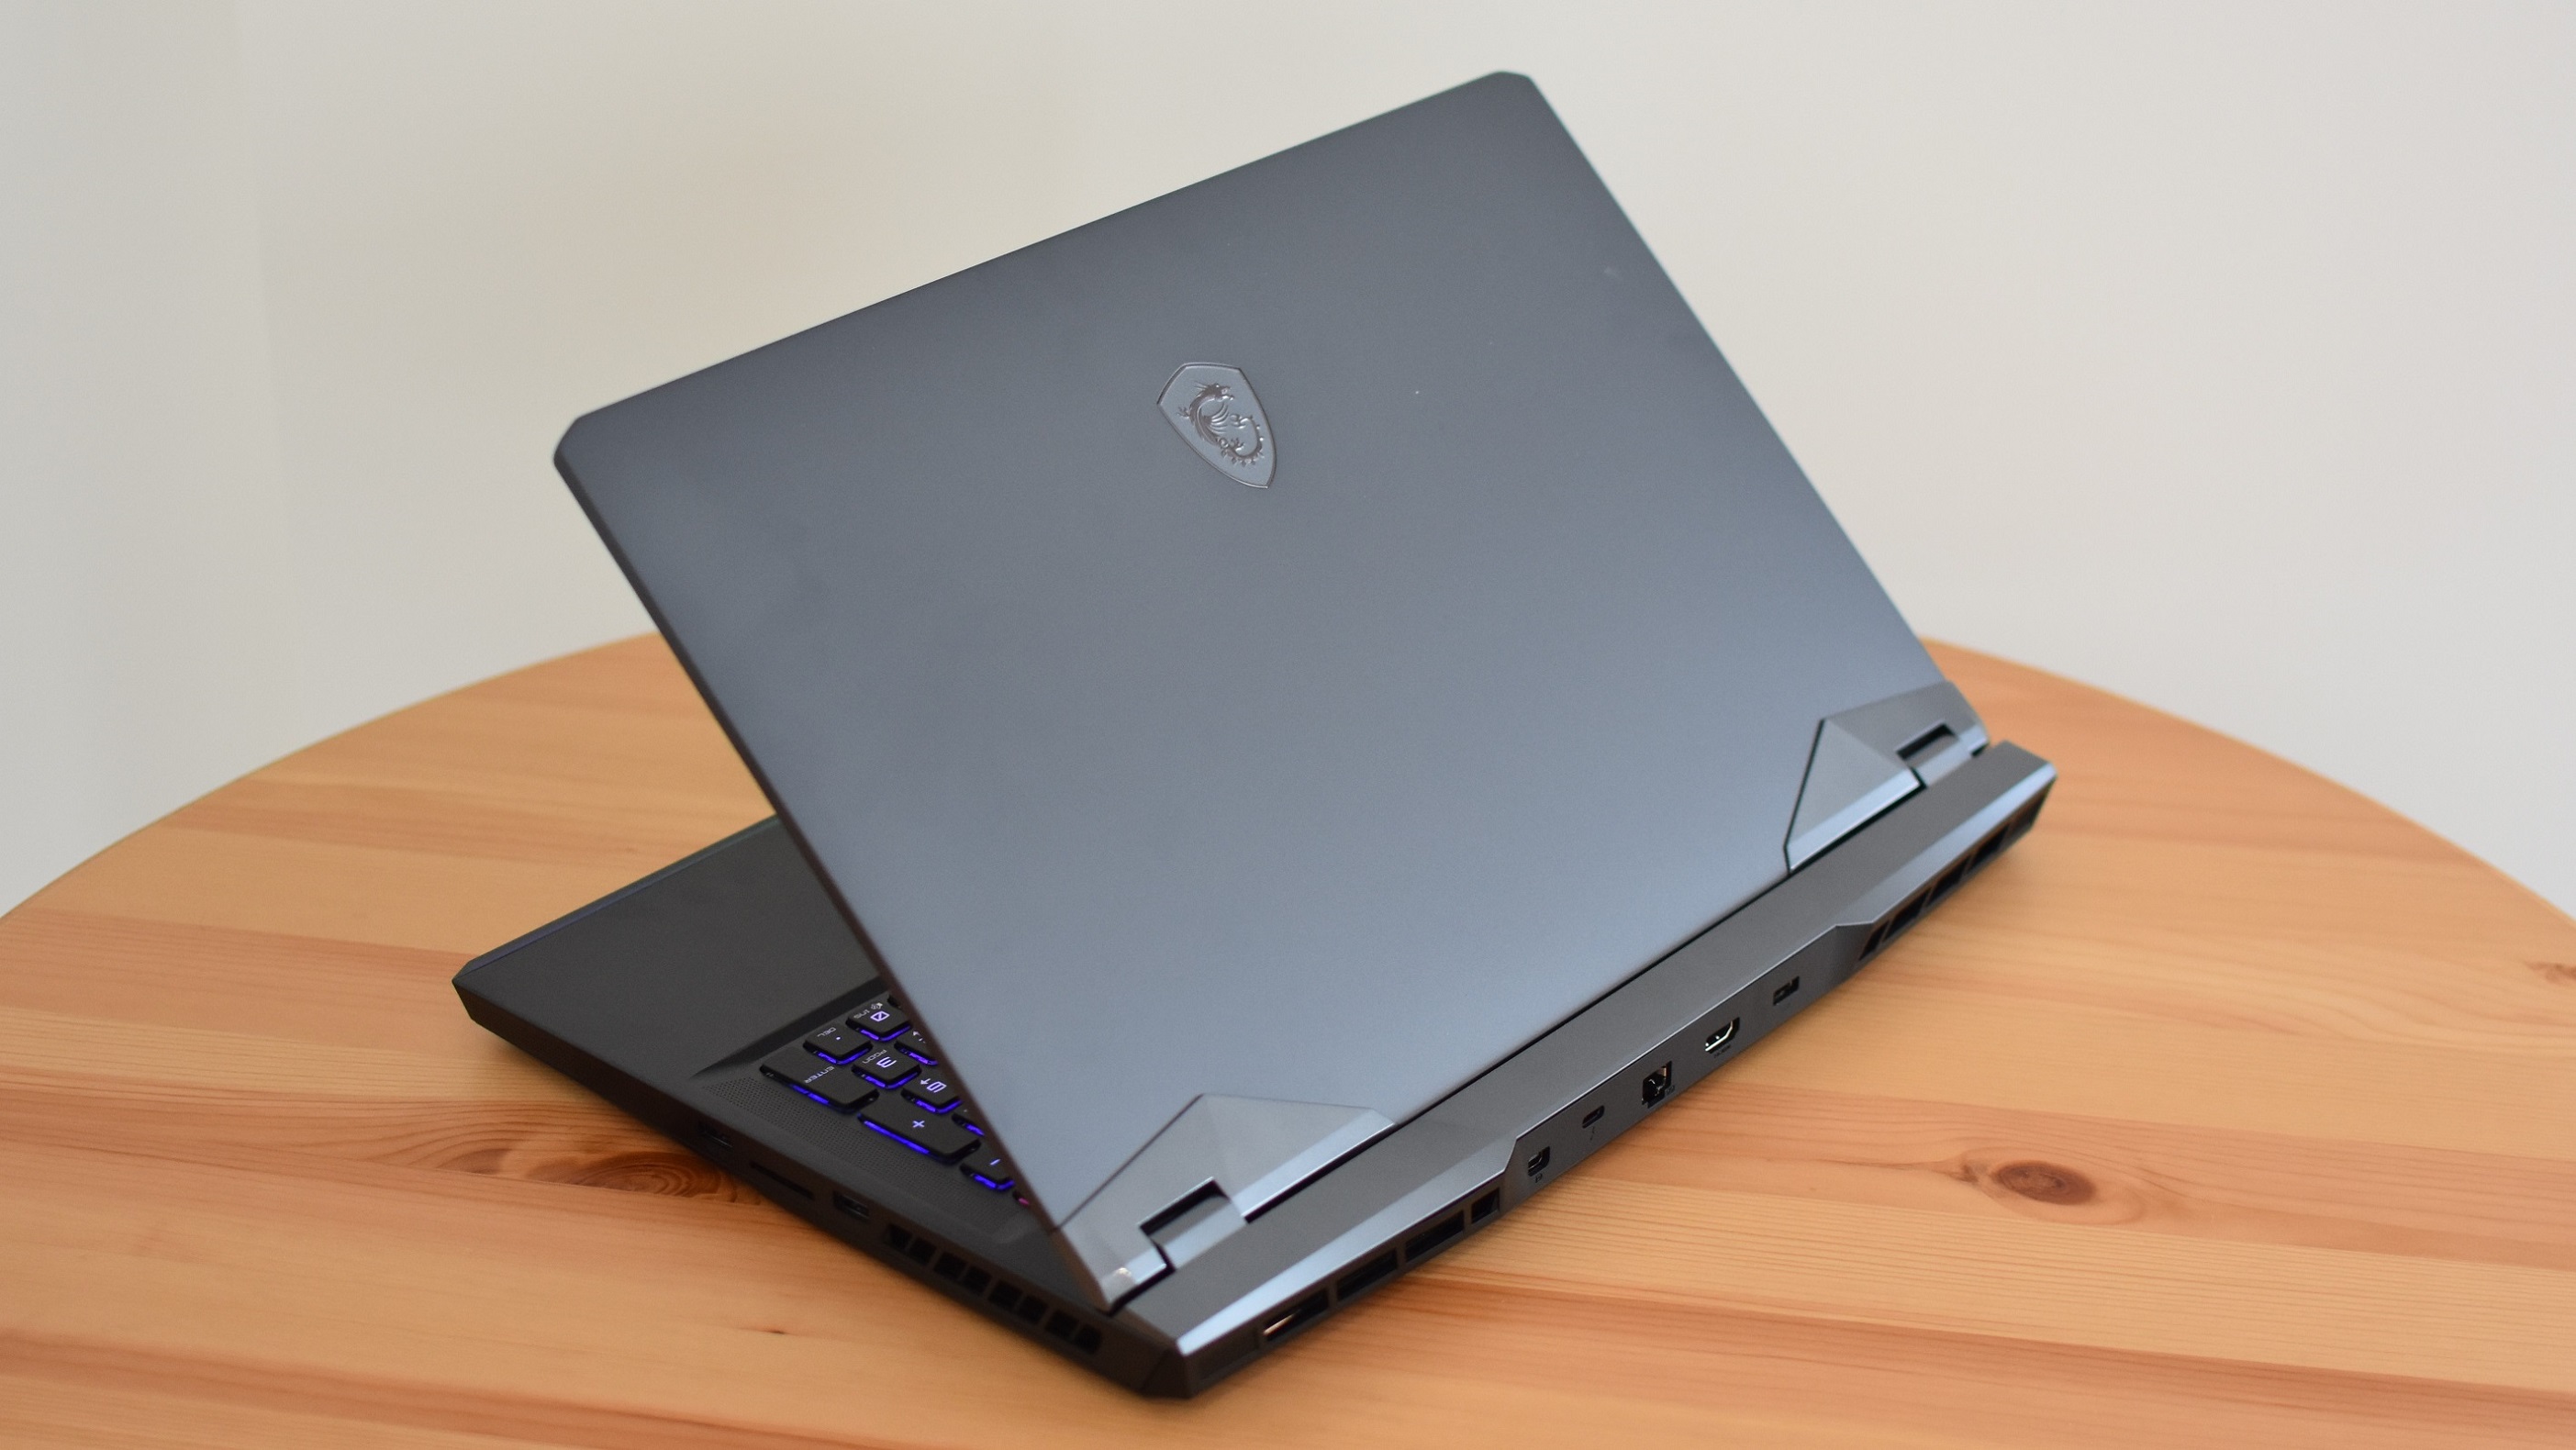 A rear view of the MSI GE76 Raider gaming laptop.